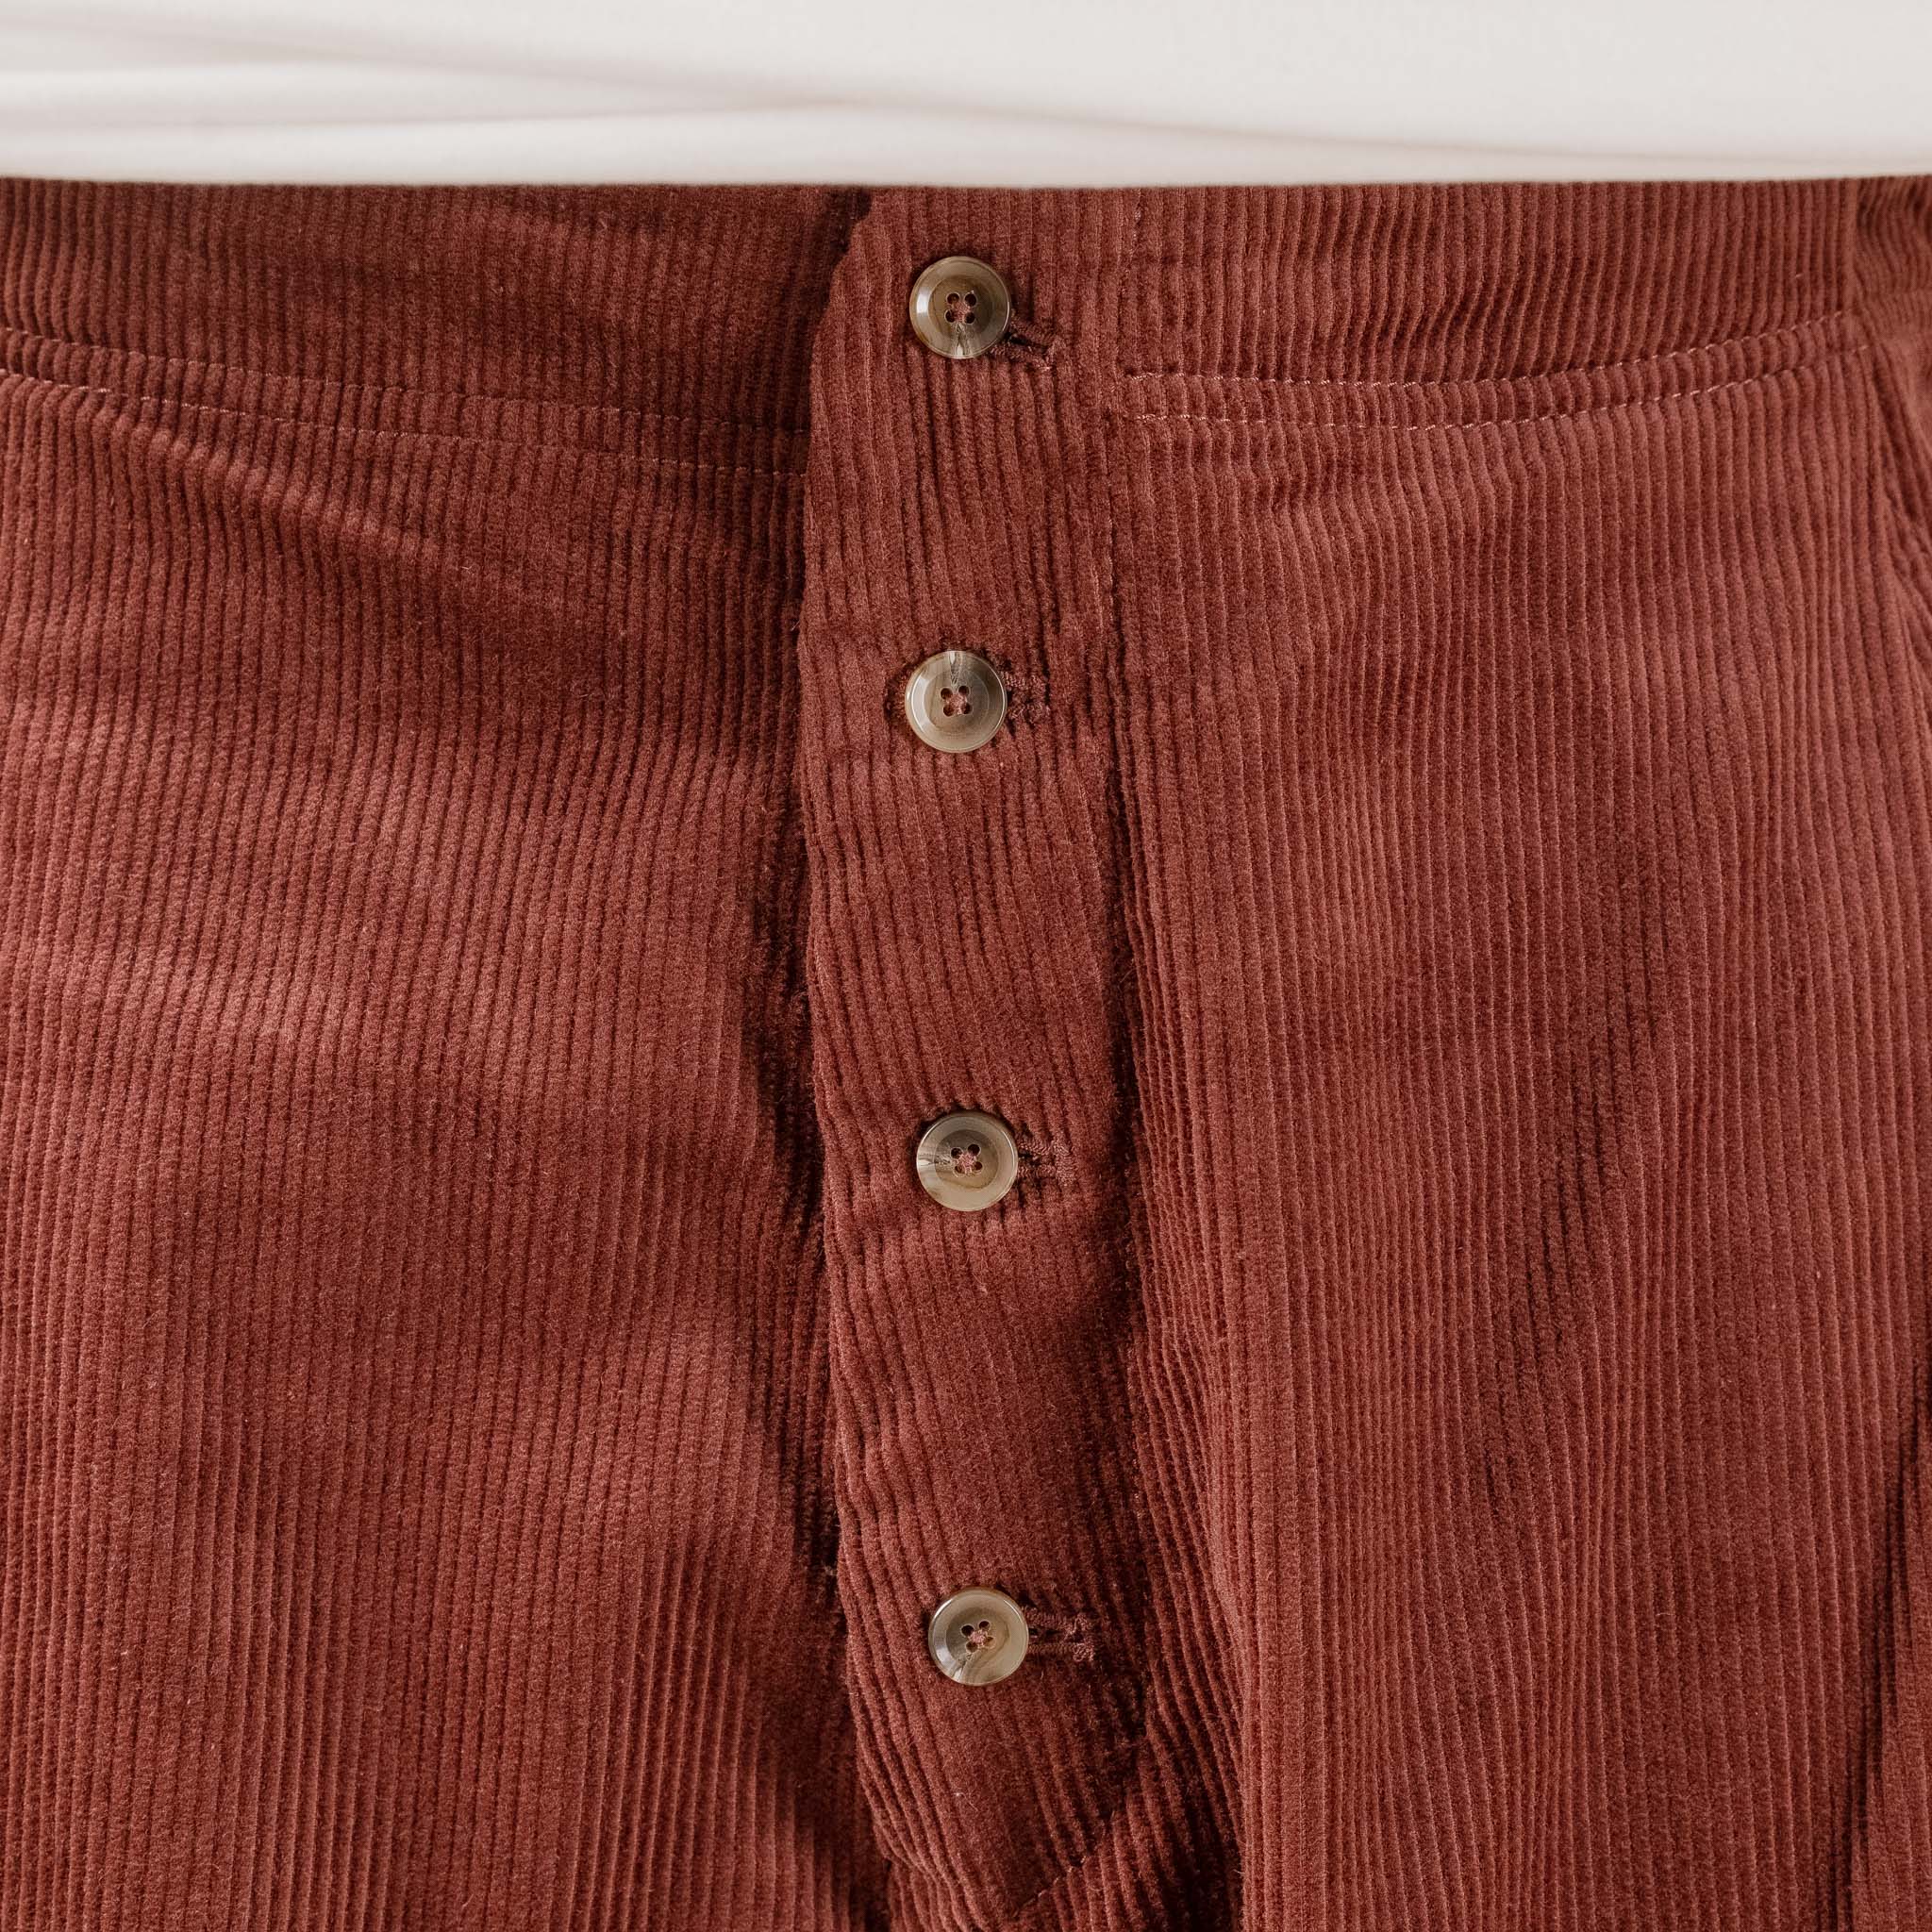 Merely Made - Corduroy Relax Wide Pants - Spice Brown 23FML212PT